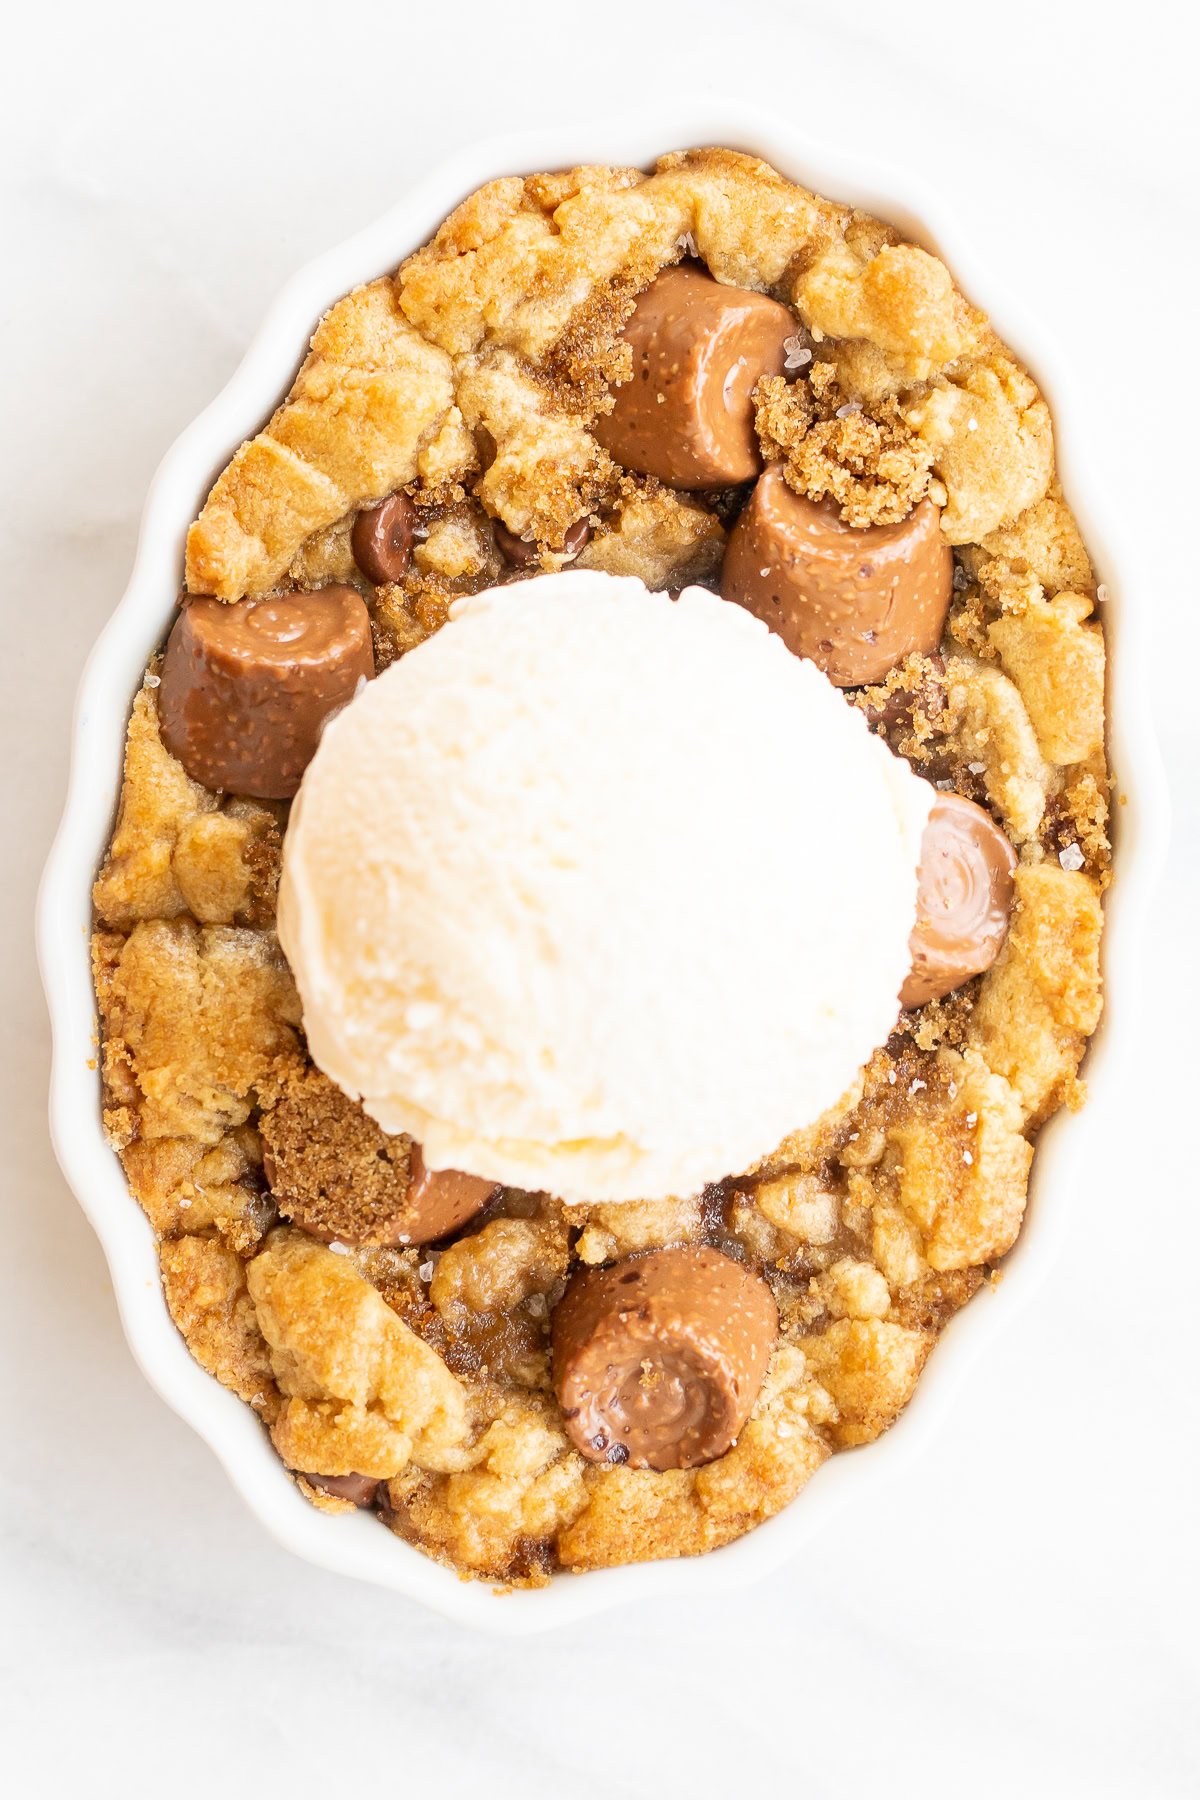 A round caramel cobbler with a crumbly topping, pieces of caramel chocolates, and a scoop of vanilla ice cream on top in a white dish.